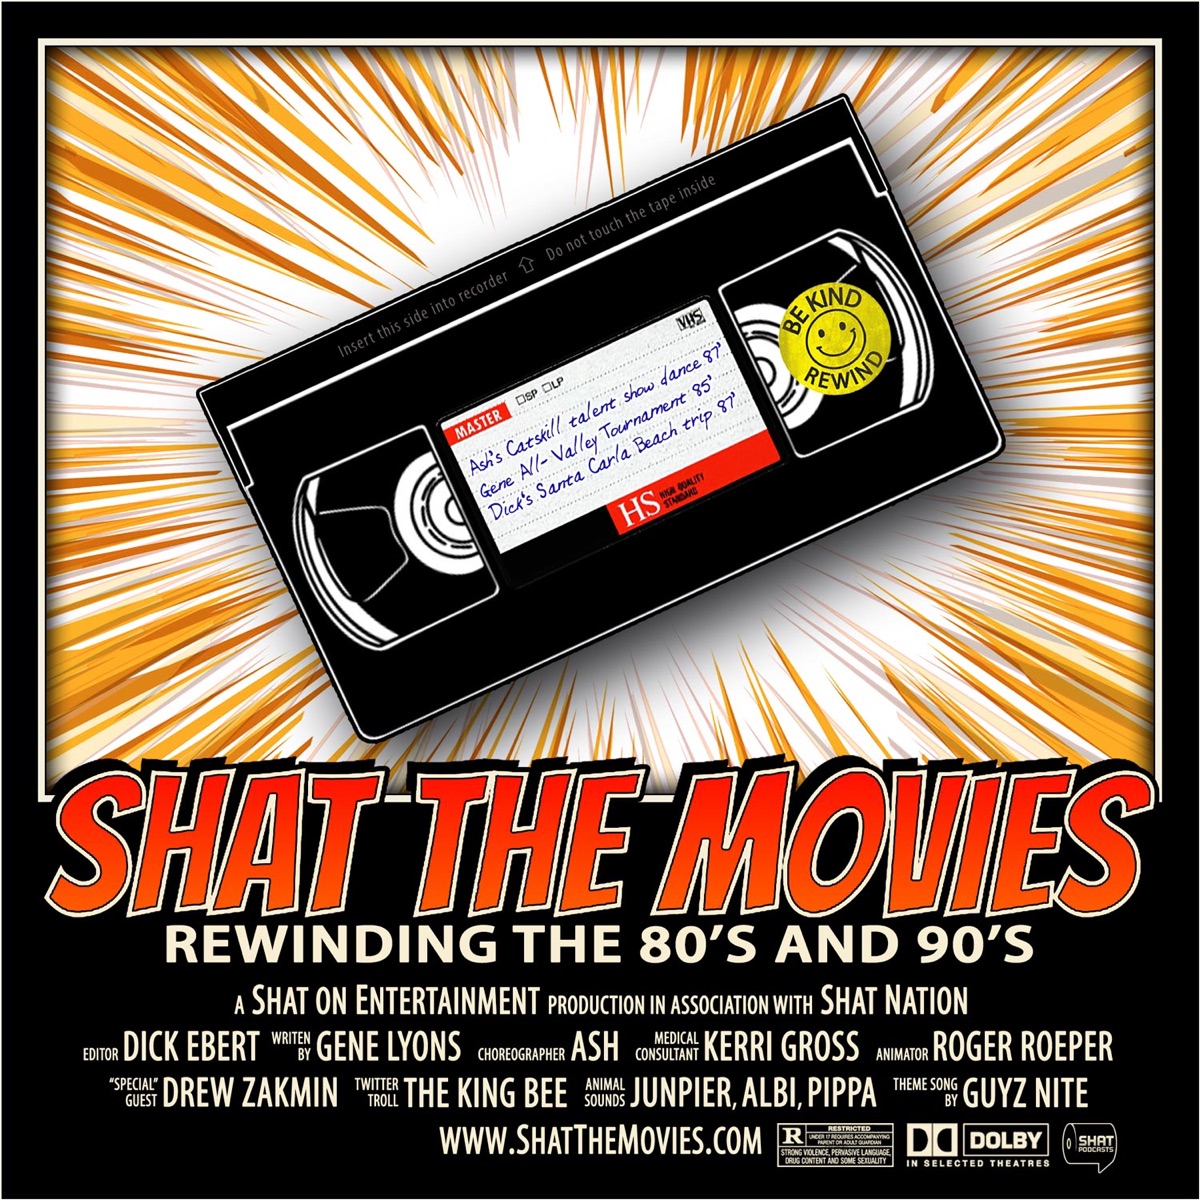 Anjelica Dildo - Shat the Movies: 80's & 90's Best Film Review â€“ Lyssna hÃ¤r â€“ Podtail